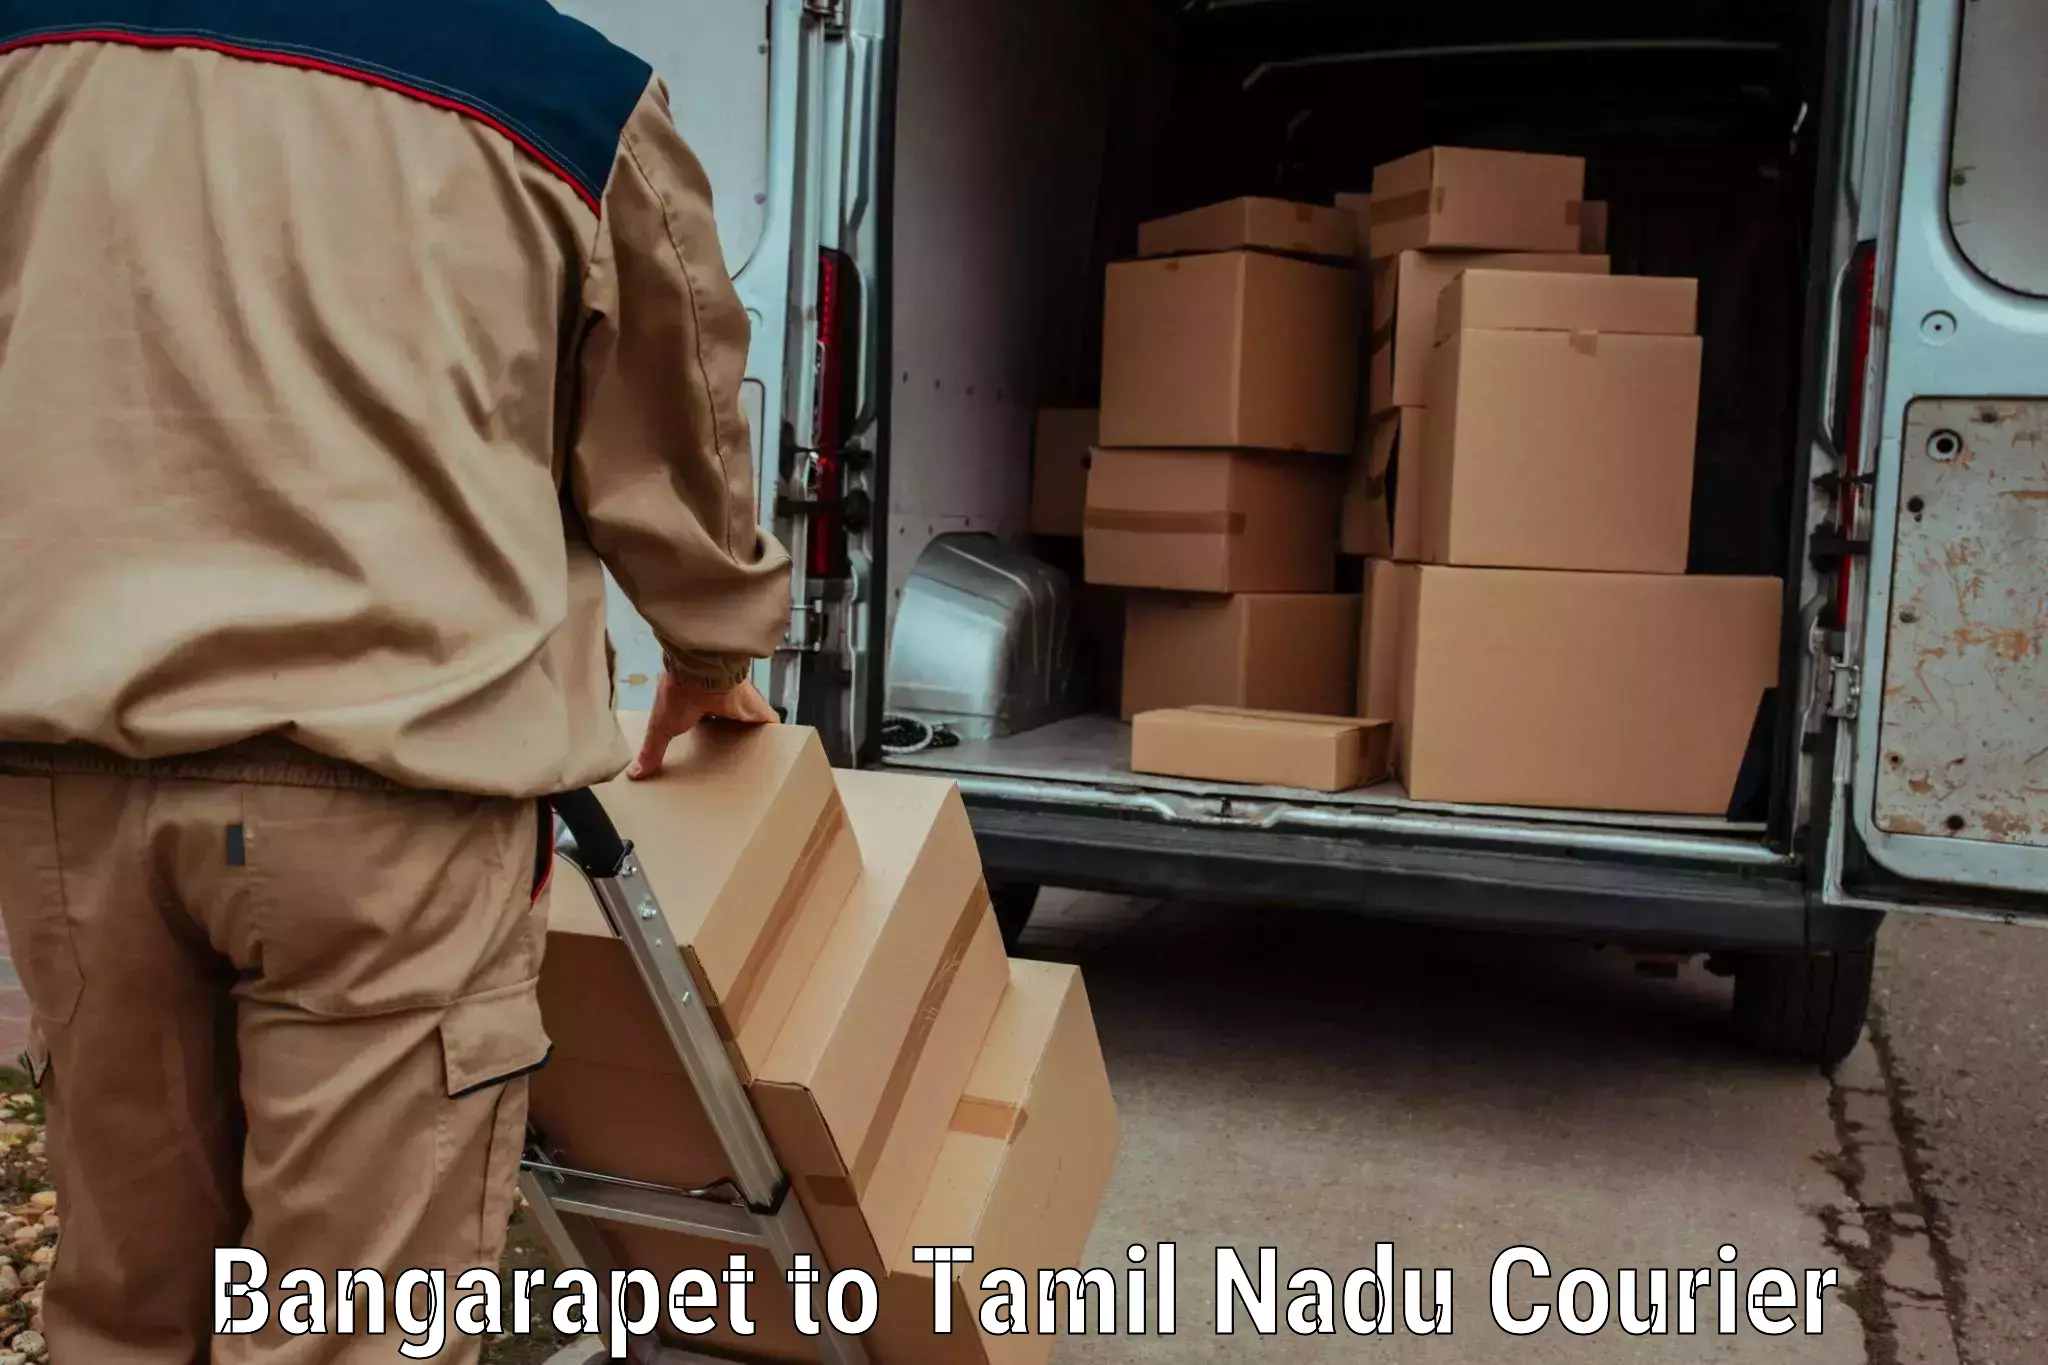 State-of-the-art courier technology Bangarapet to Theni